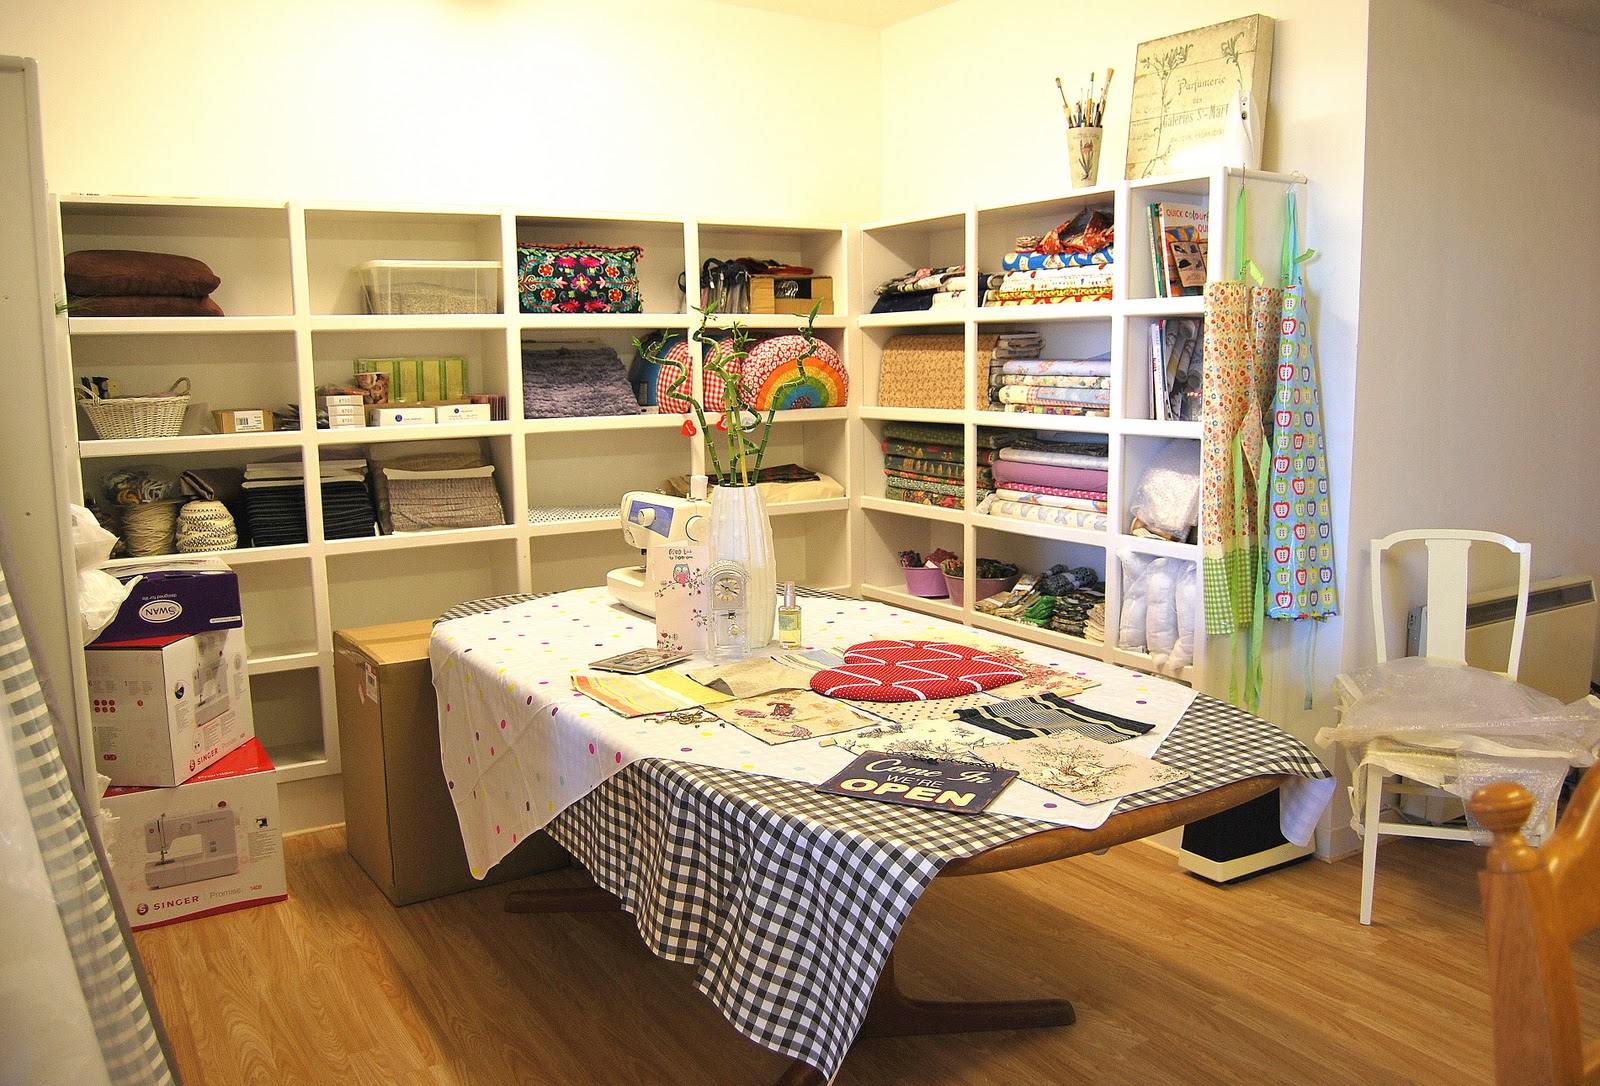 Kath's Blog......diary of the everyday life of a crafter: September 2011